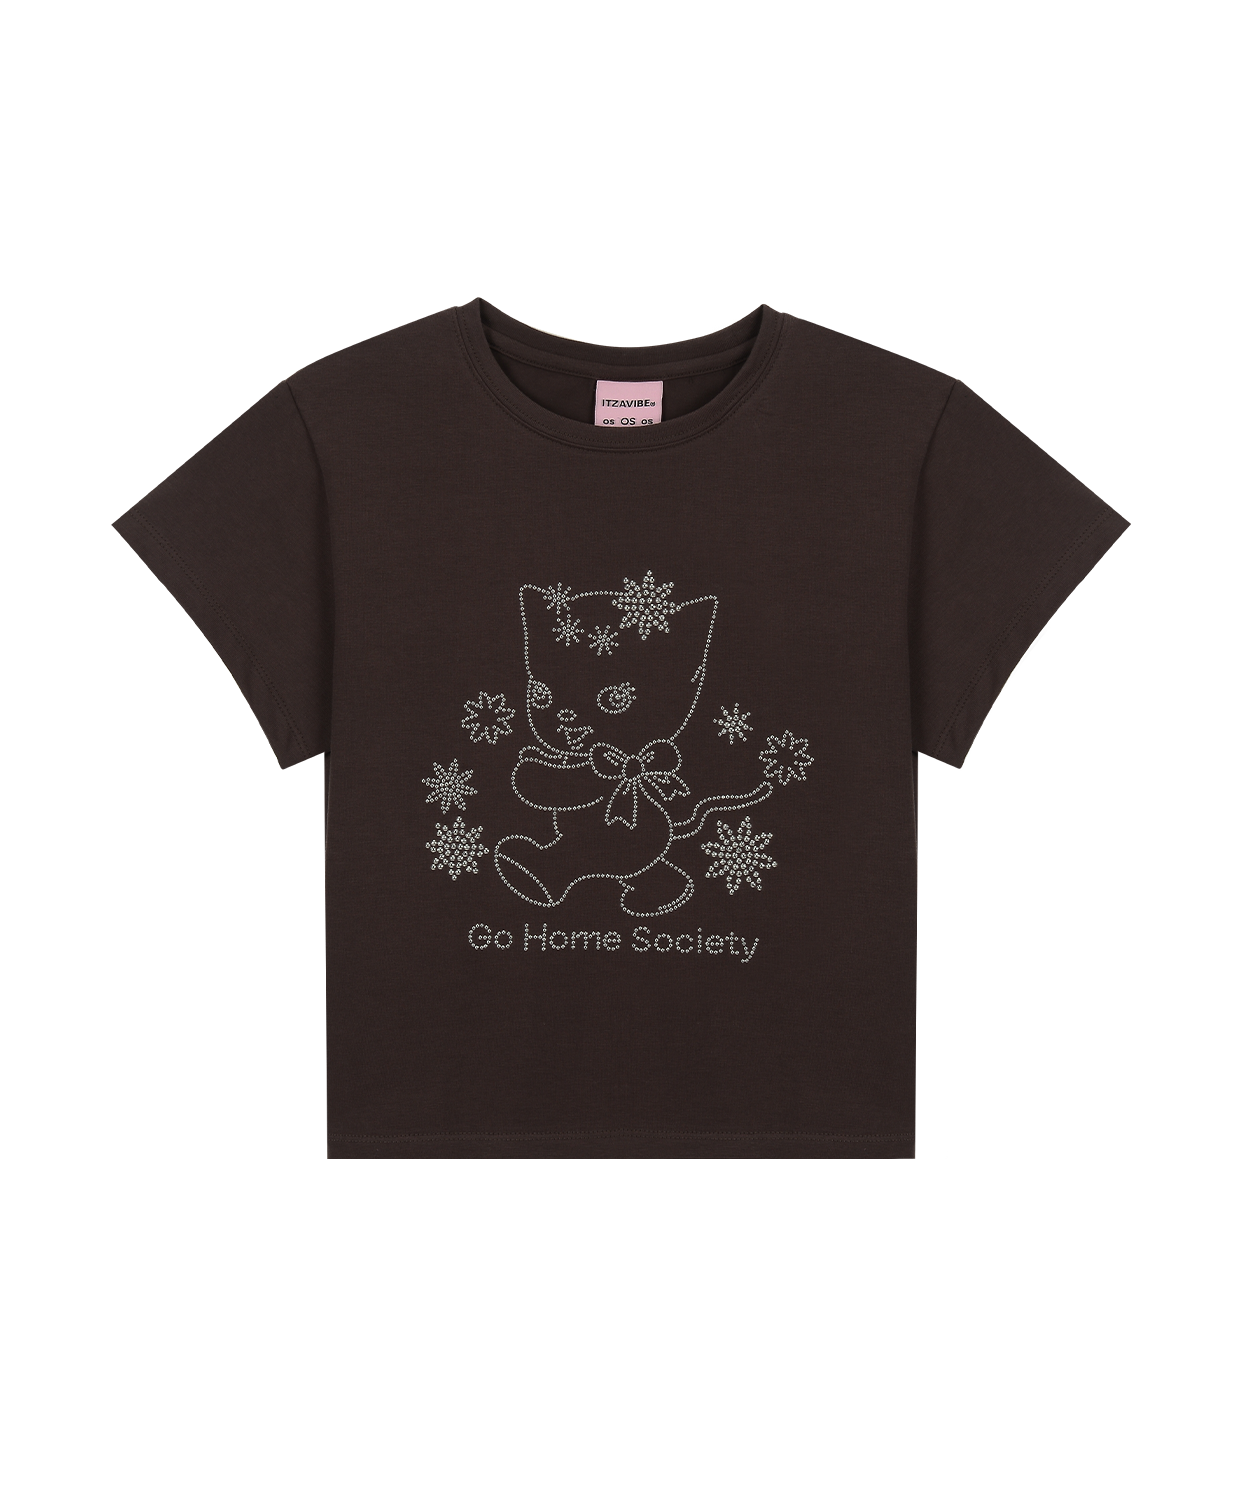 [IBA23WT20BR] GO HOME SOCIETY CAT CROP T SHIRT - BROWN